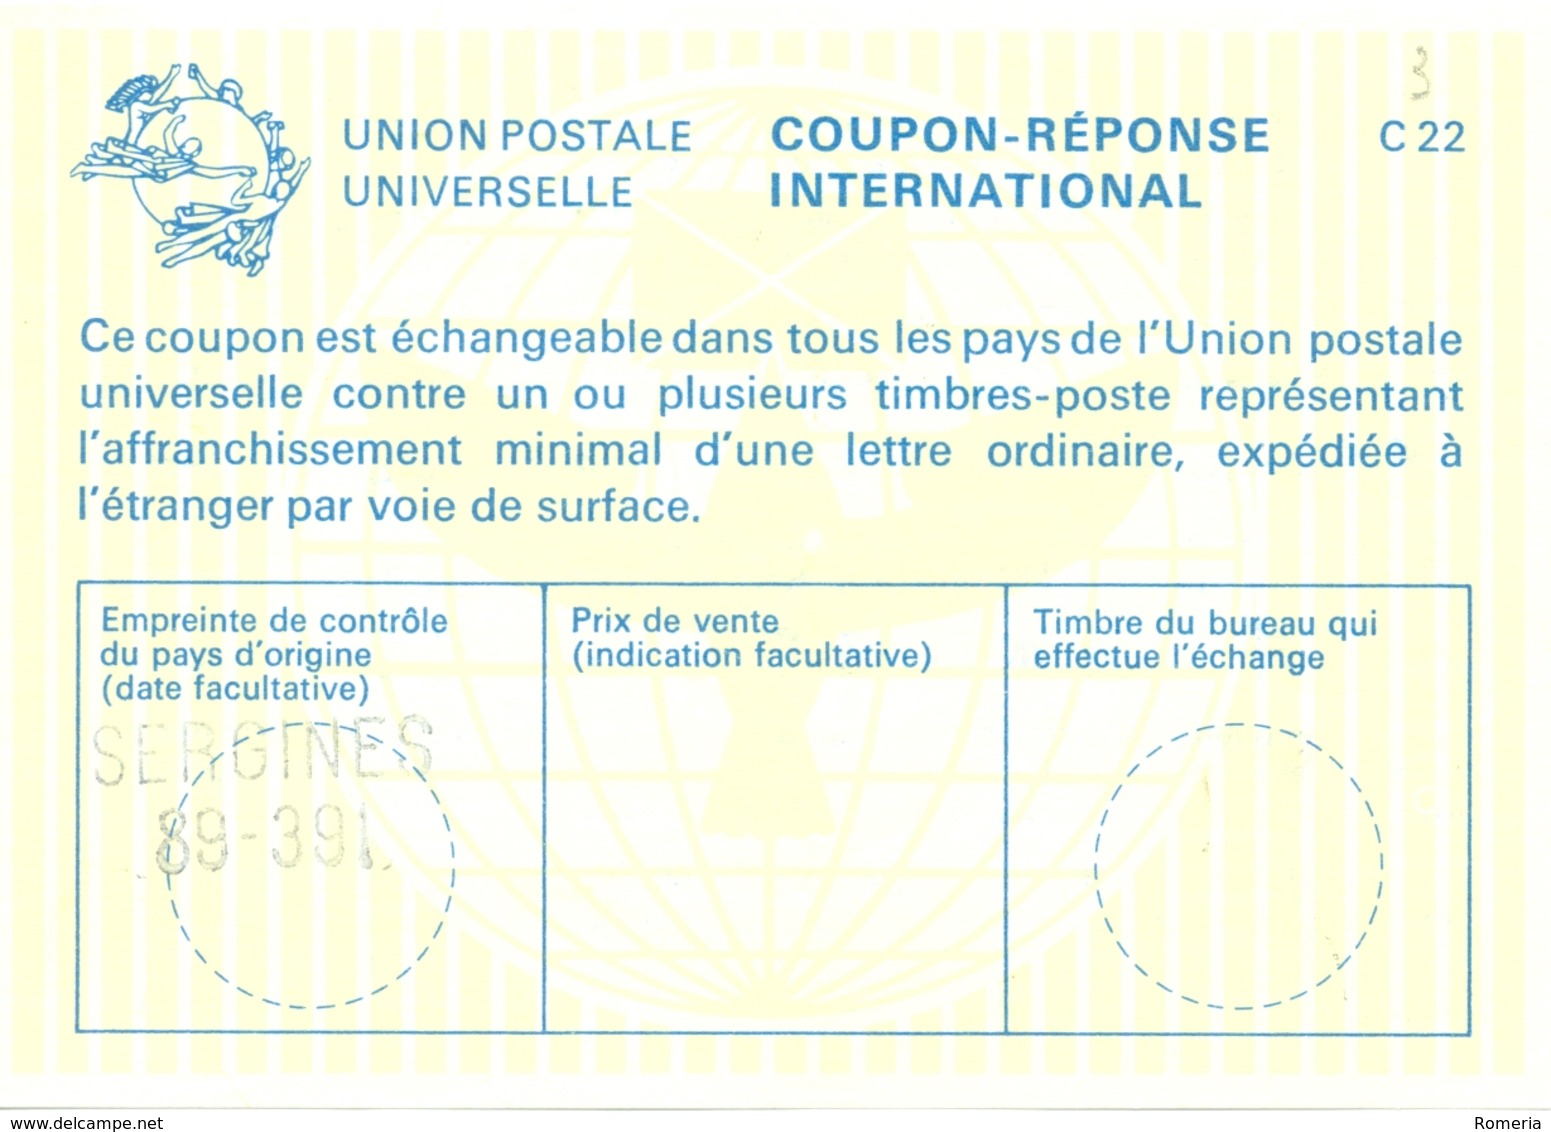 France - Coupon Réponse International - Sergines 89-391 - Reply Coupons